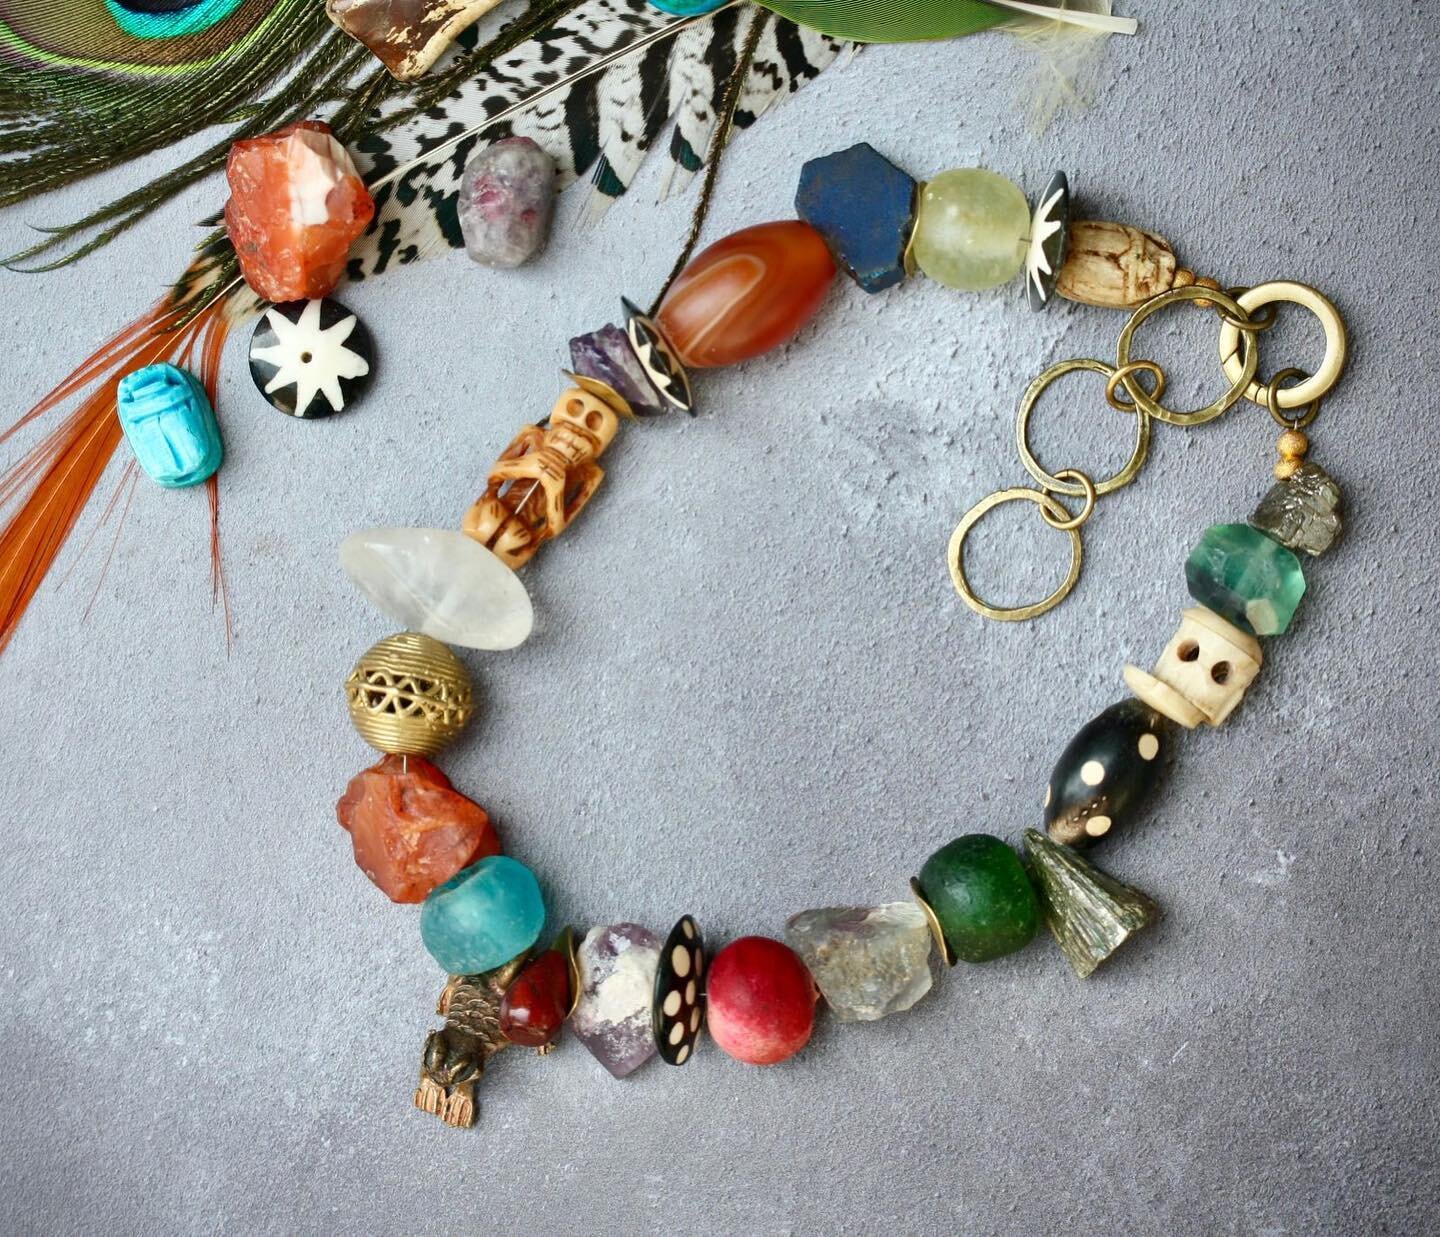 This bohemian statement necklace is crafted from found and handmade pieces by our @palomita_jewellery . They include recycled glass beads, Yak bone skulls, large Peruvian seed pods, semi-precious stones such as amethyst, Fluorite, carnelian and a han